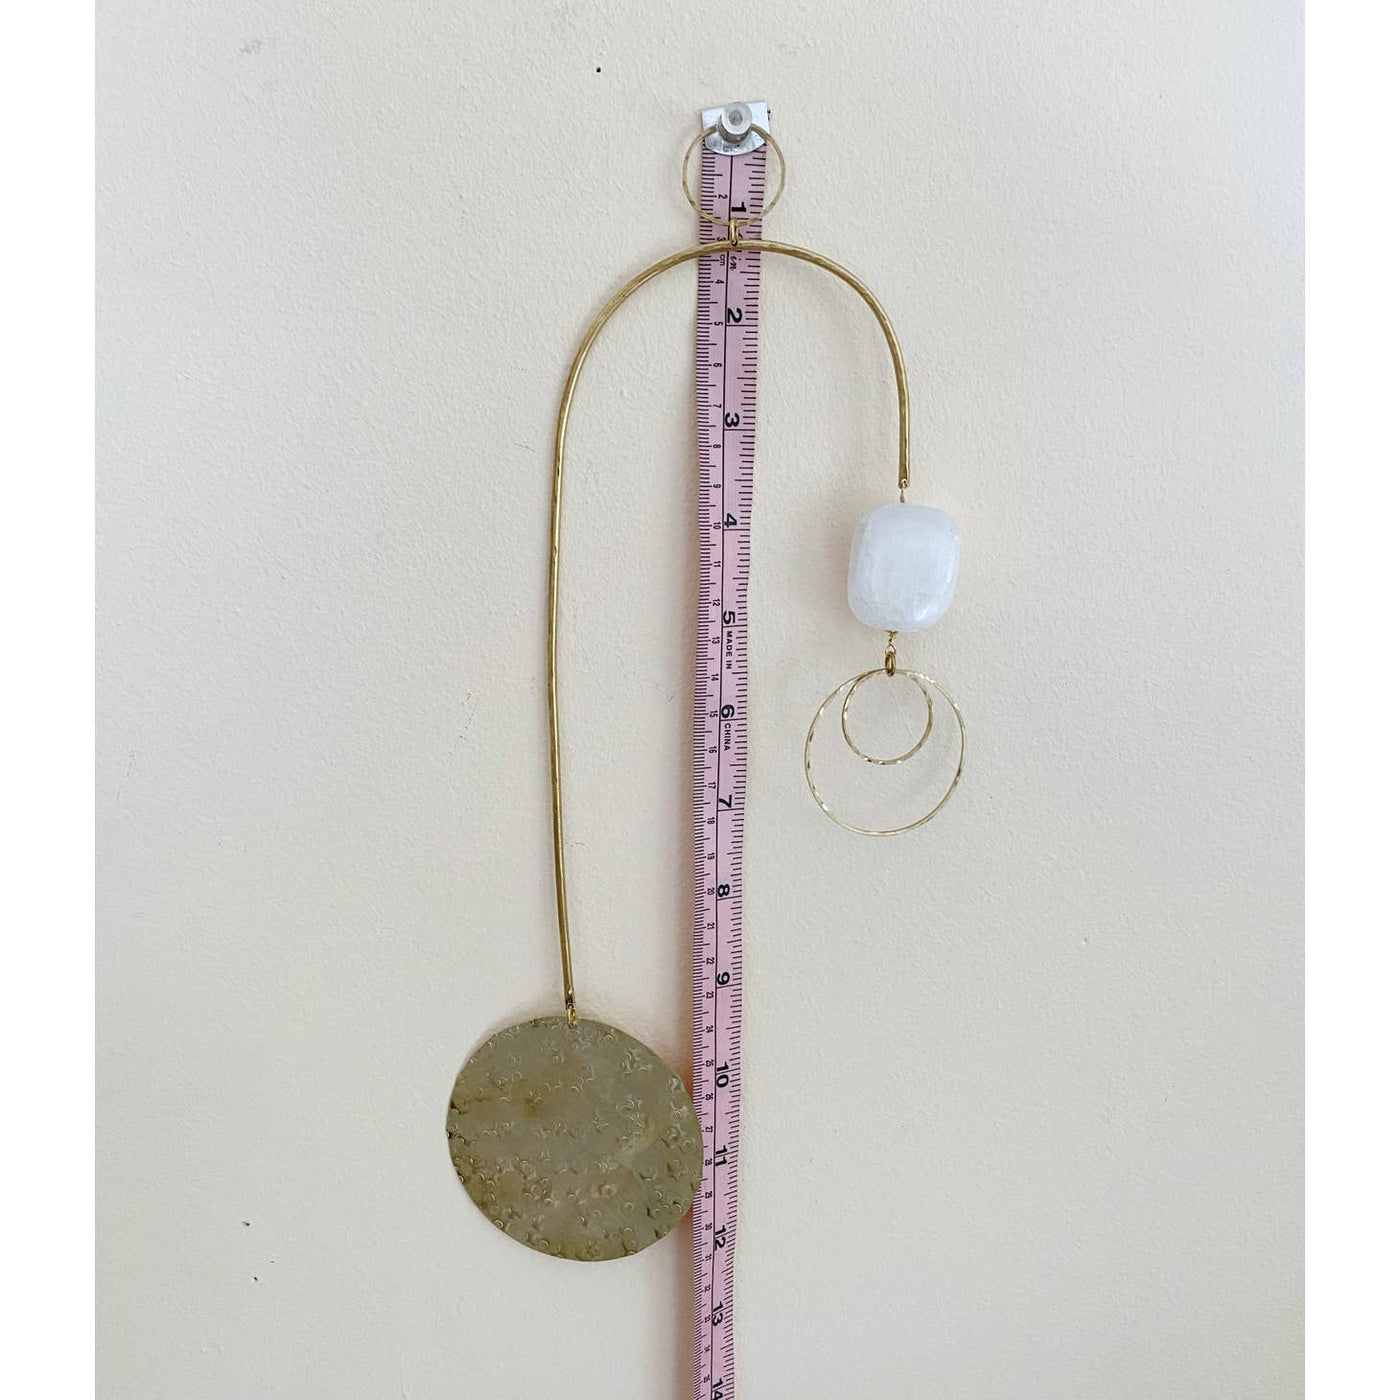 wall hanging with brass disc and selenite stone, shown with a measuring tape for exact dimensions